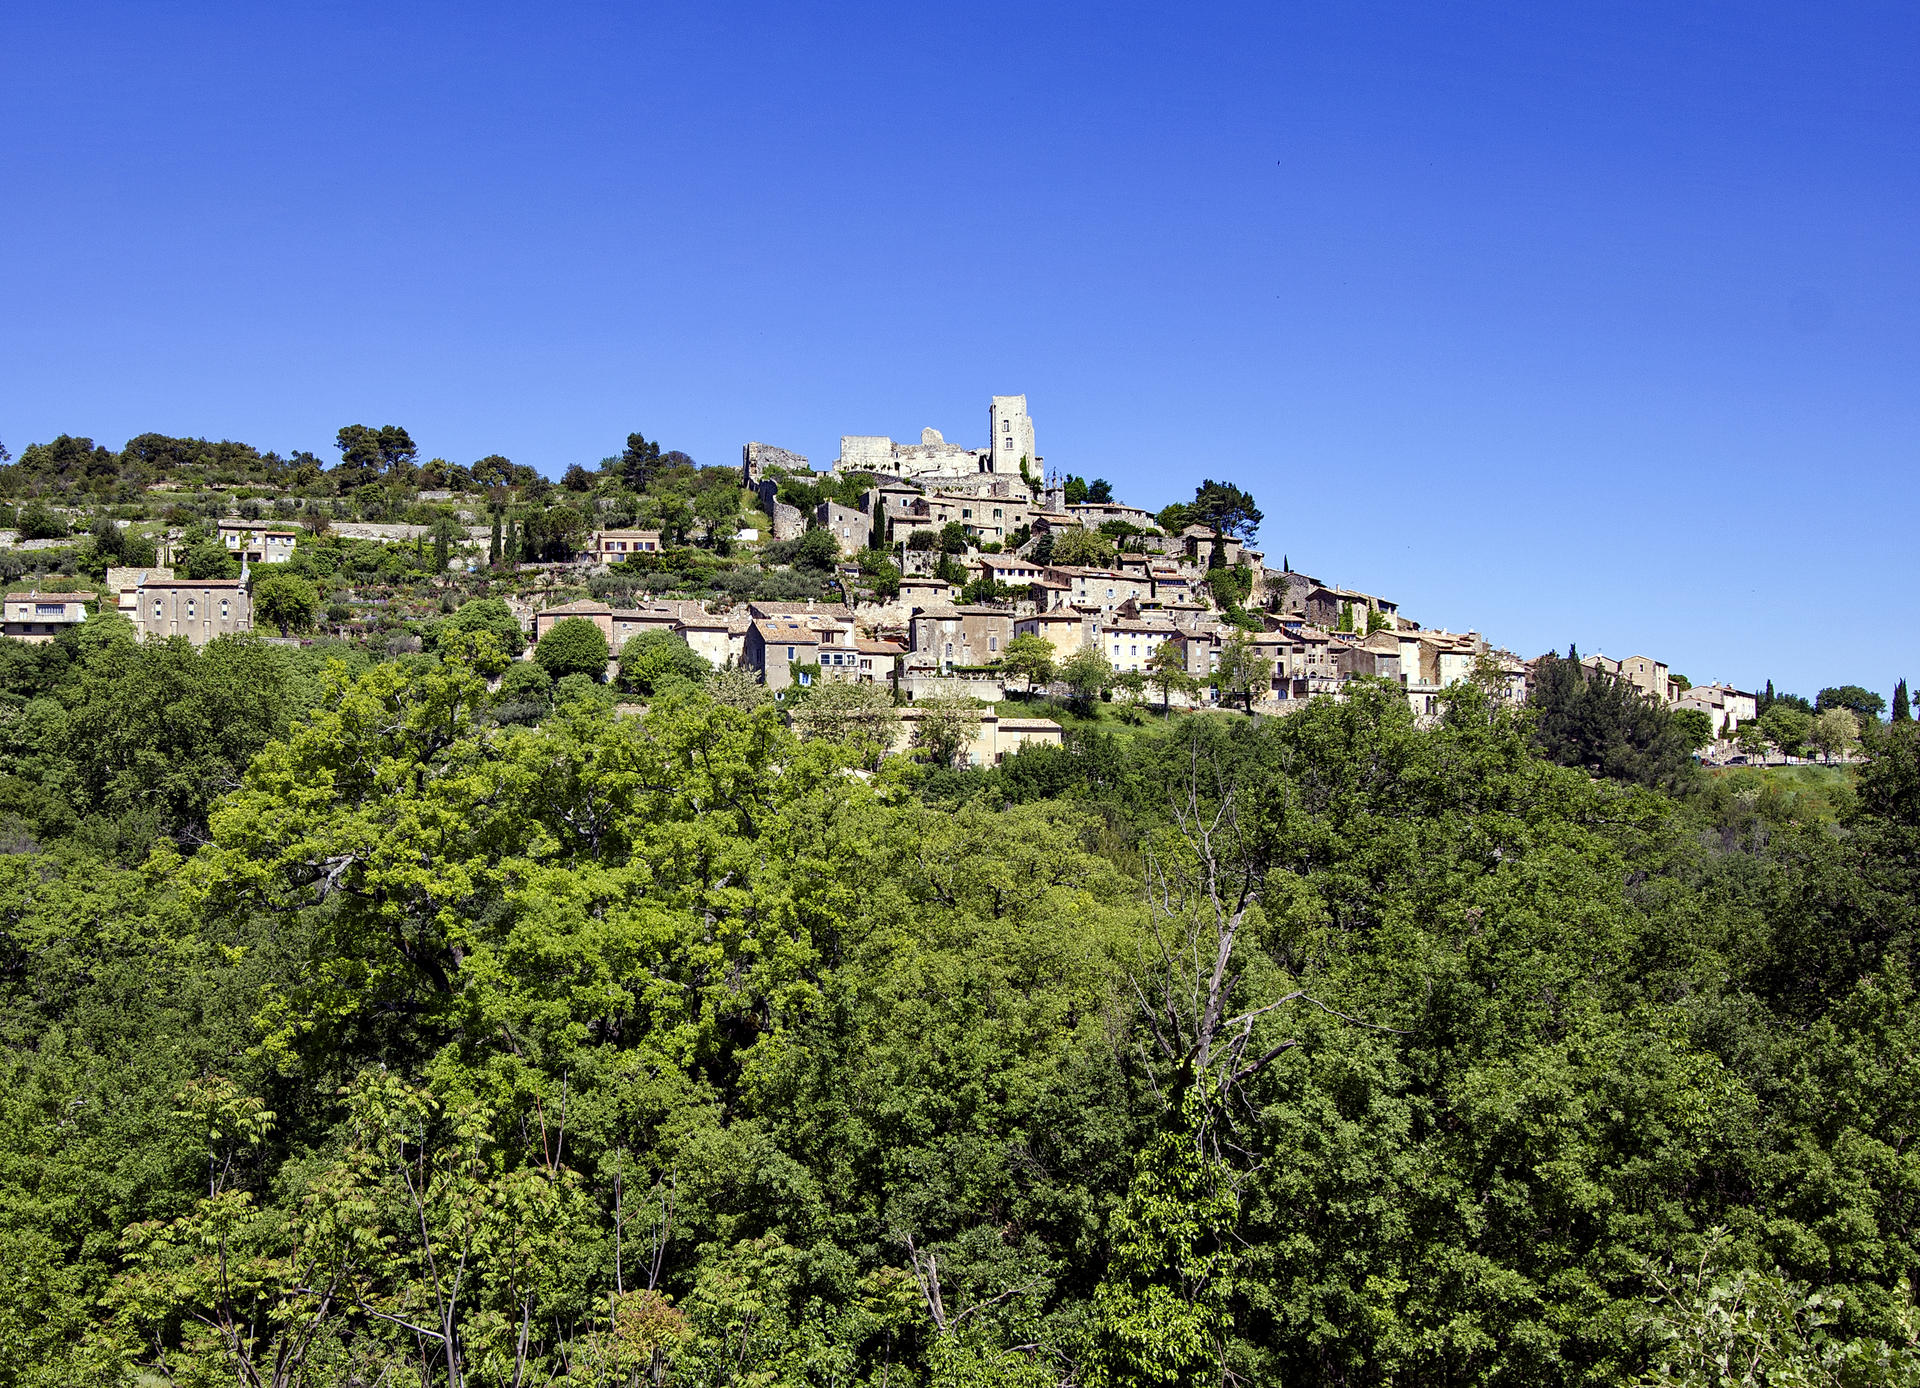 Chateau de Lacoste, former home to the Marquis de Sade, looms over the village of Lacoste.